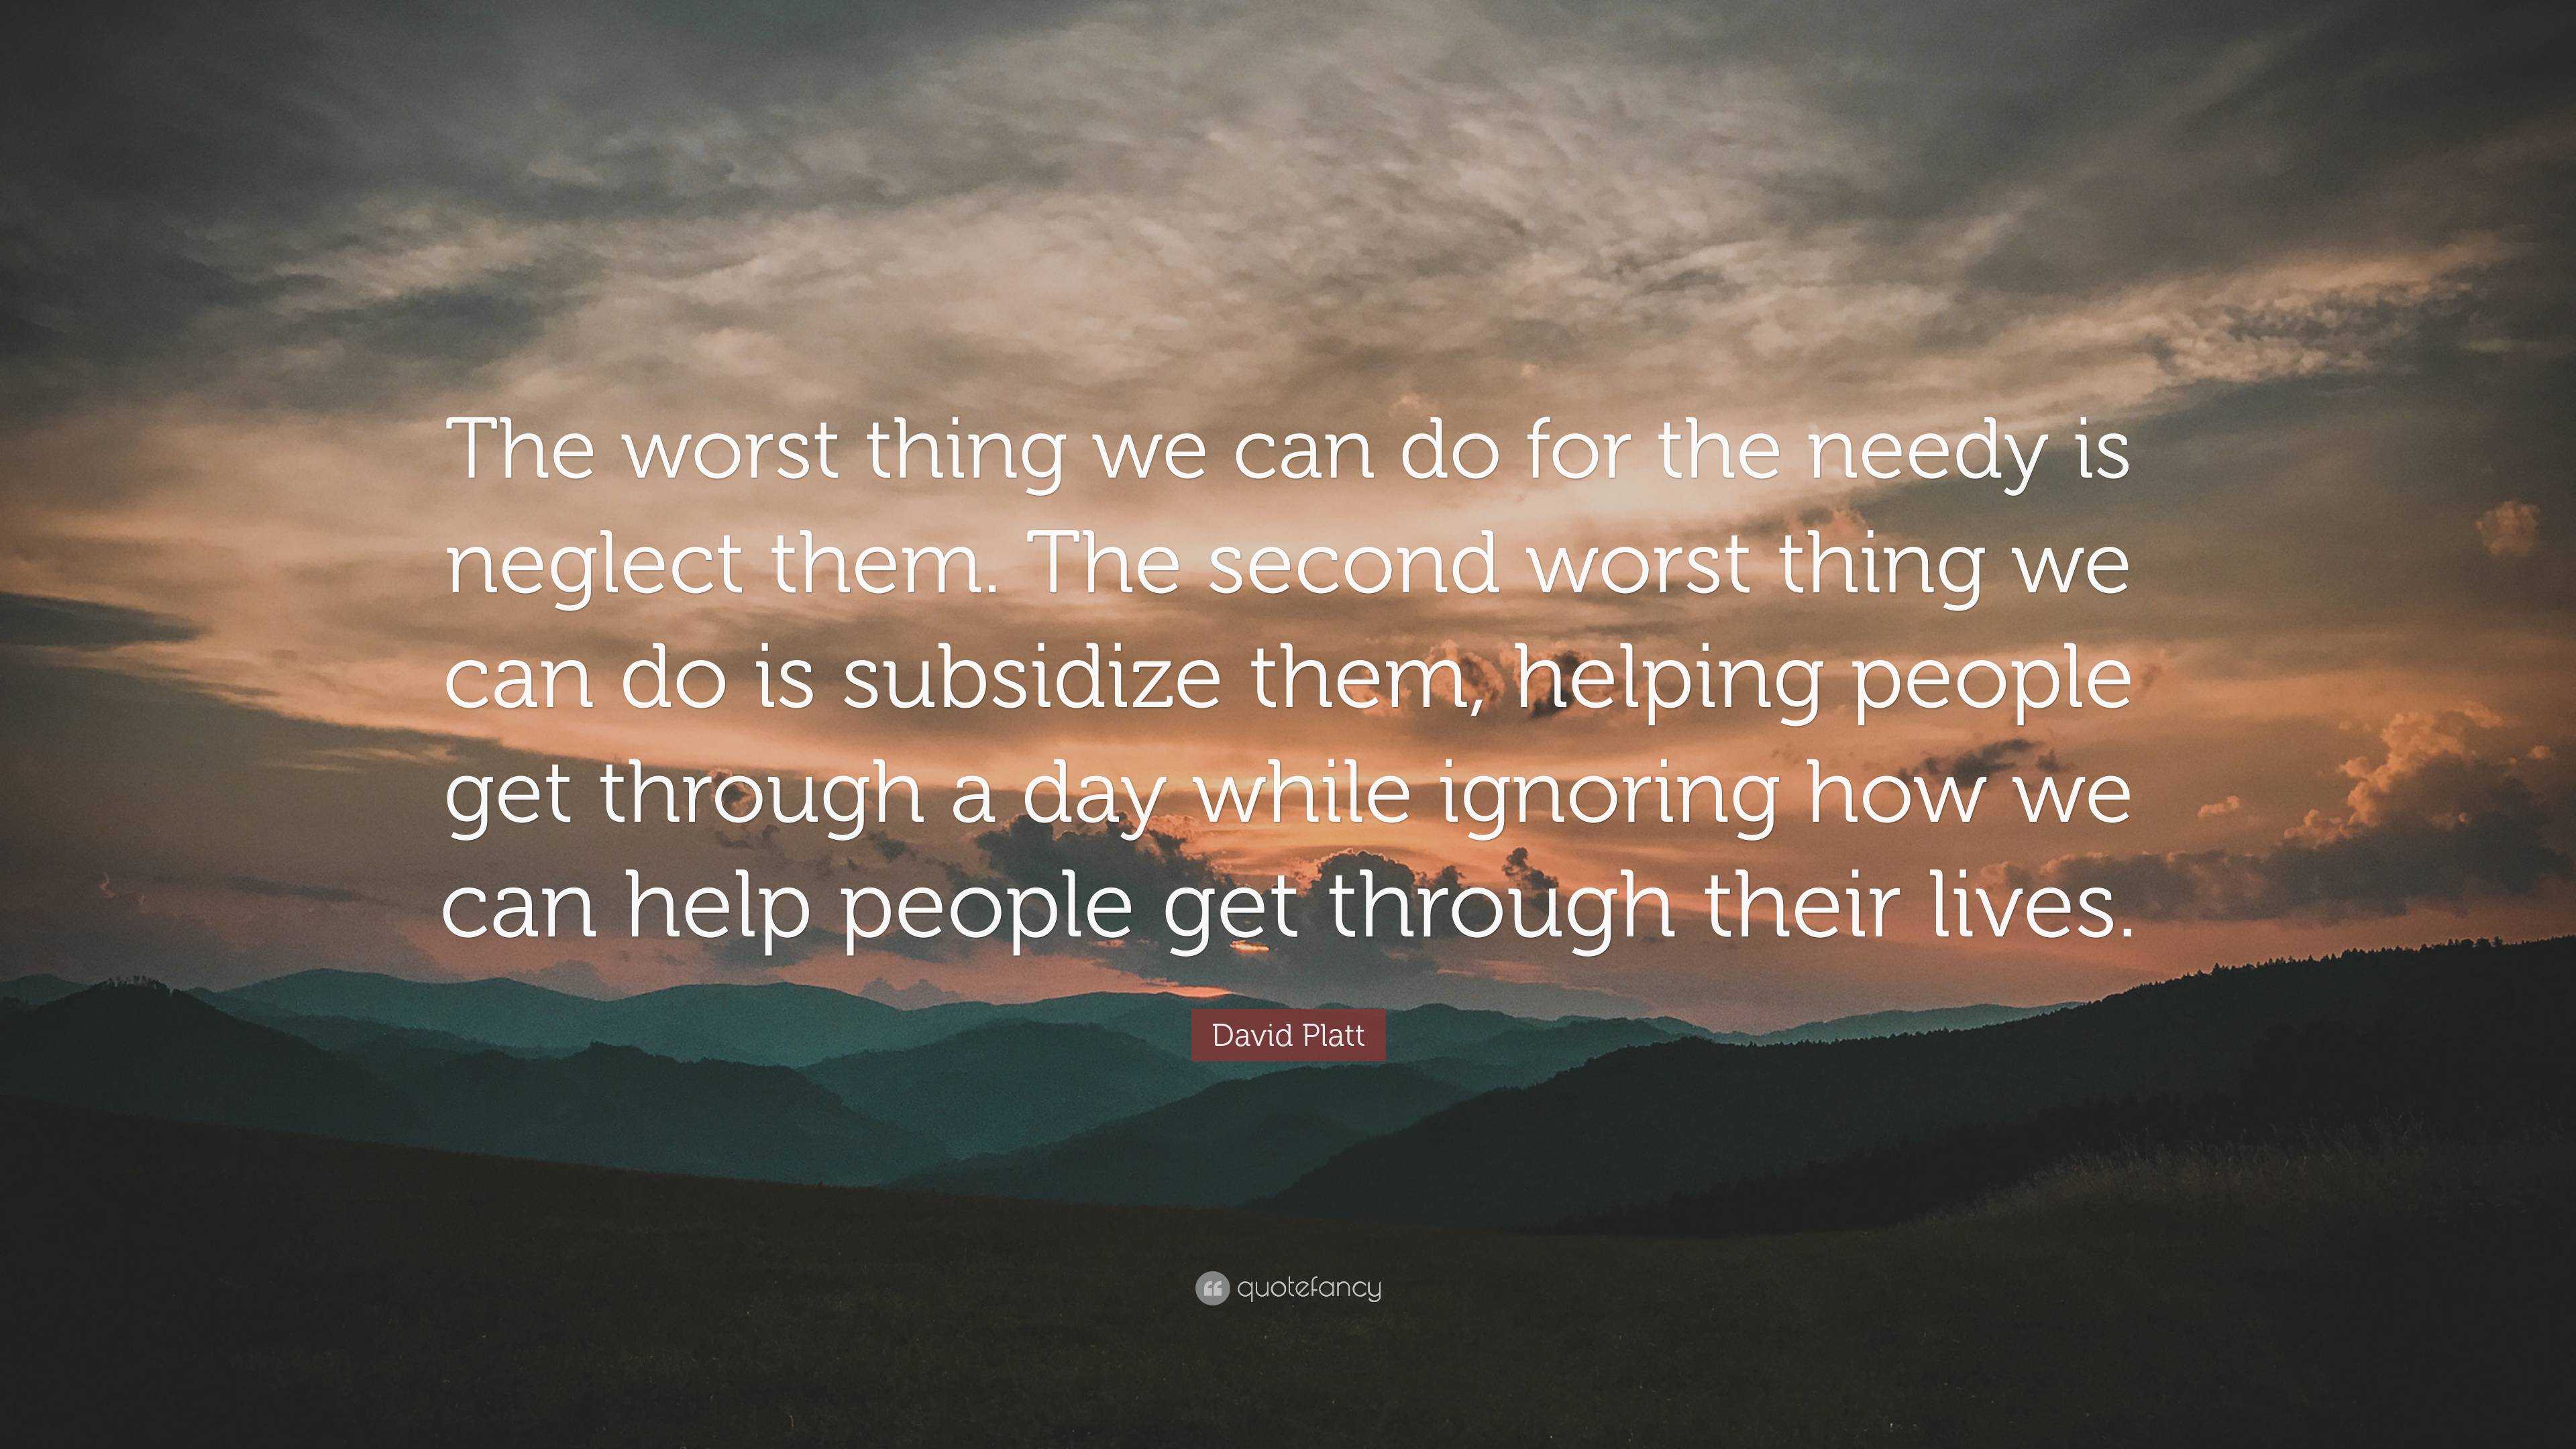 David Platt Quote: “The worst thing we can do for the needy is neglect ...